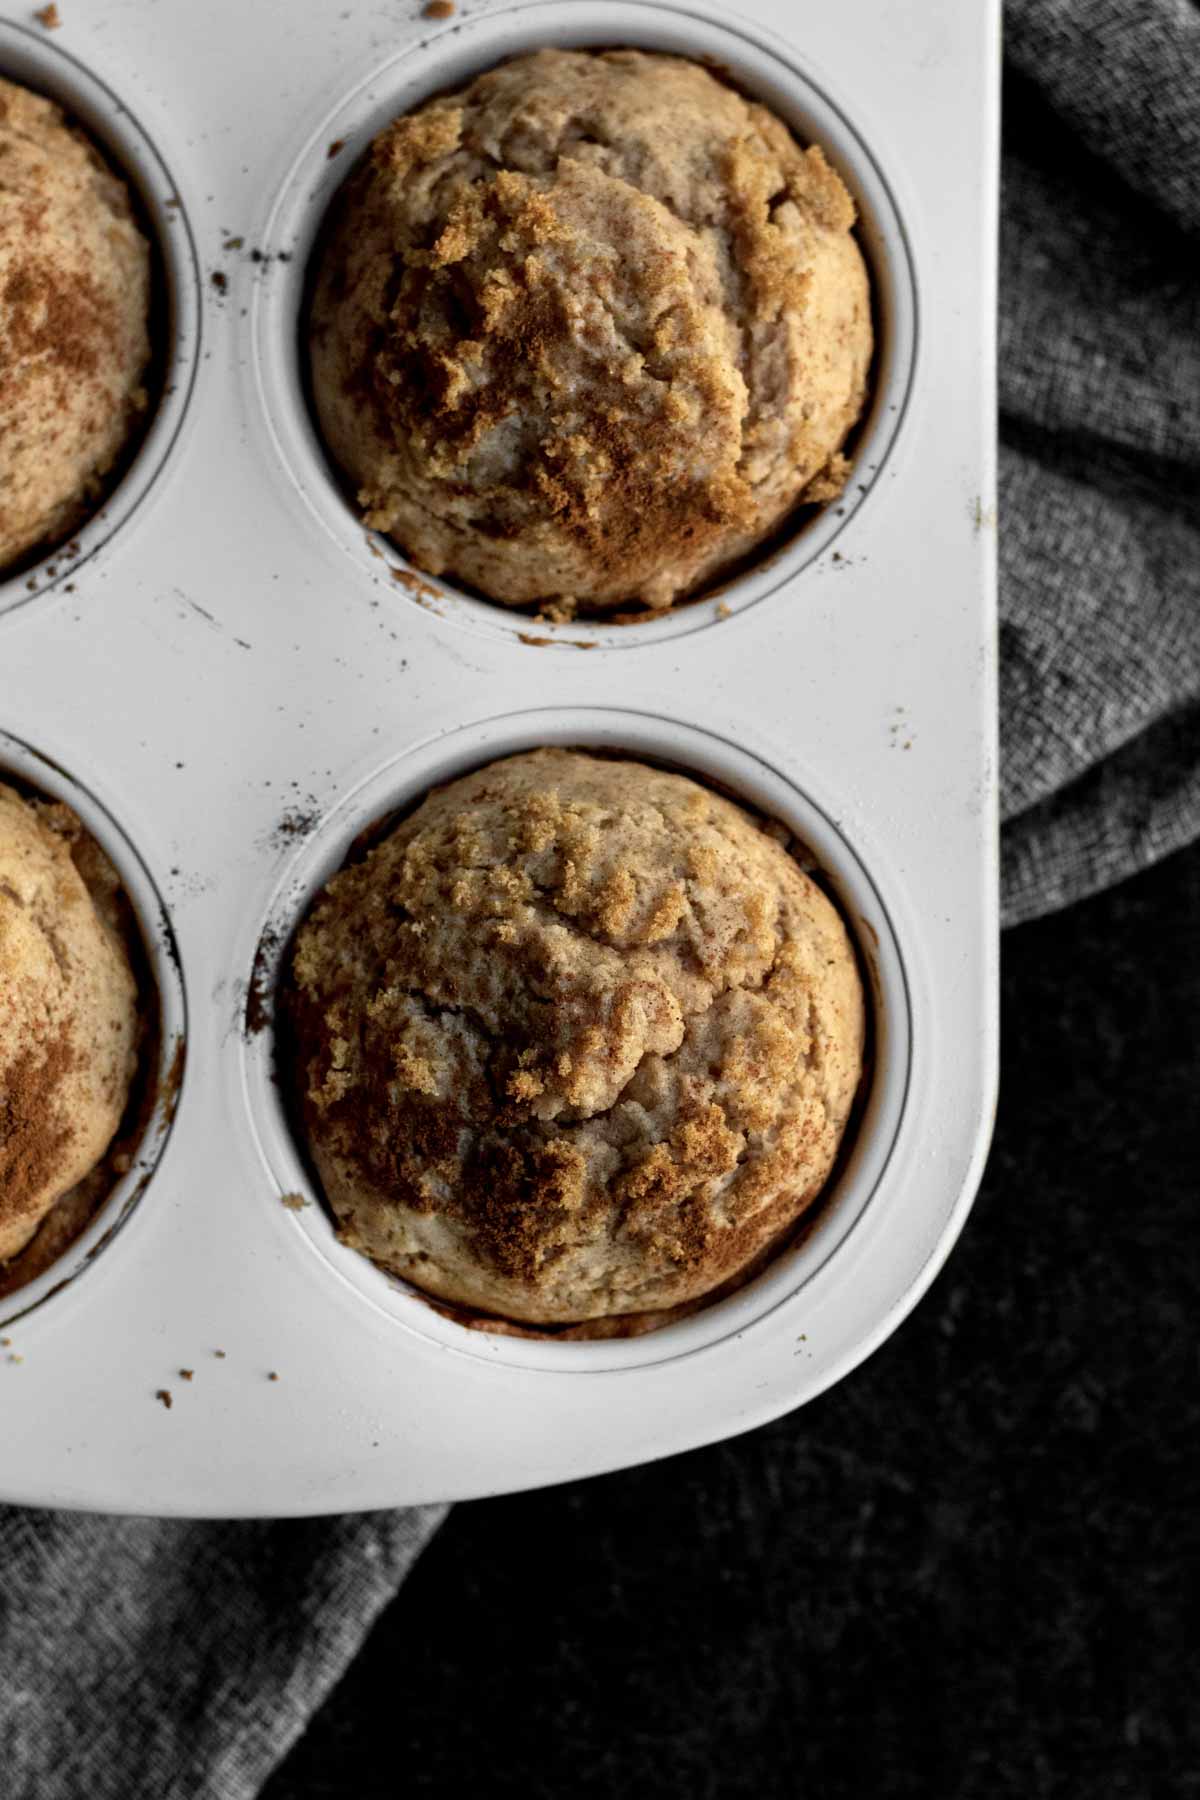 The Jumbo Apple Cinnamon Muffins are sitting in the muffin tray.